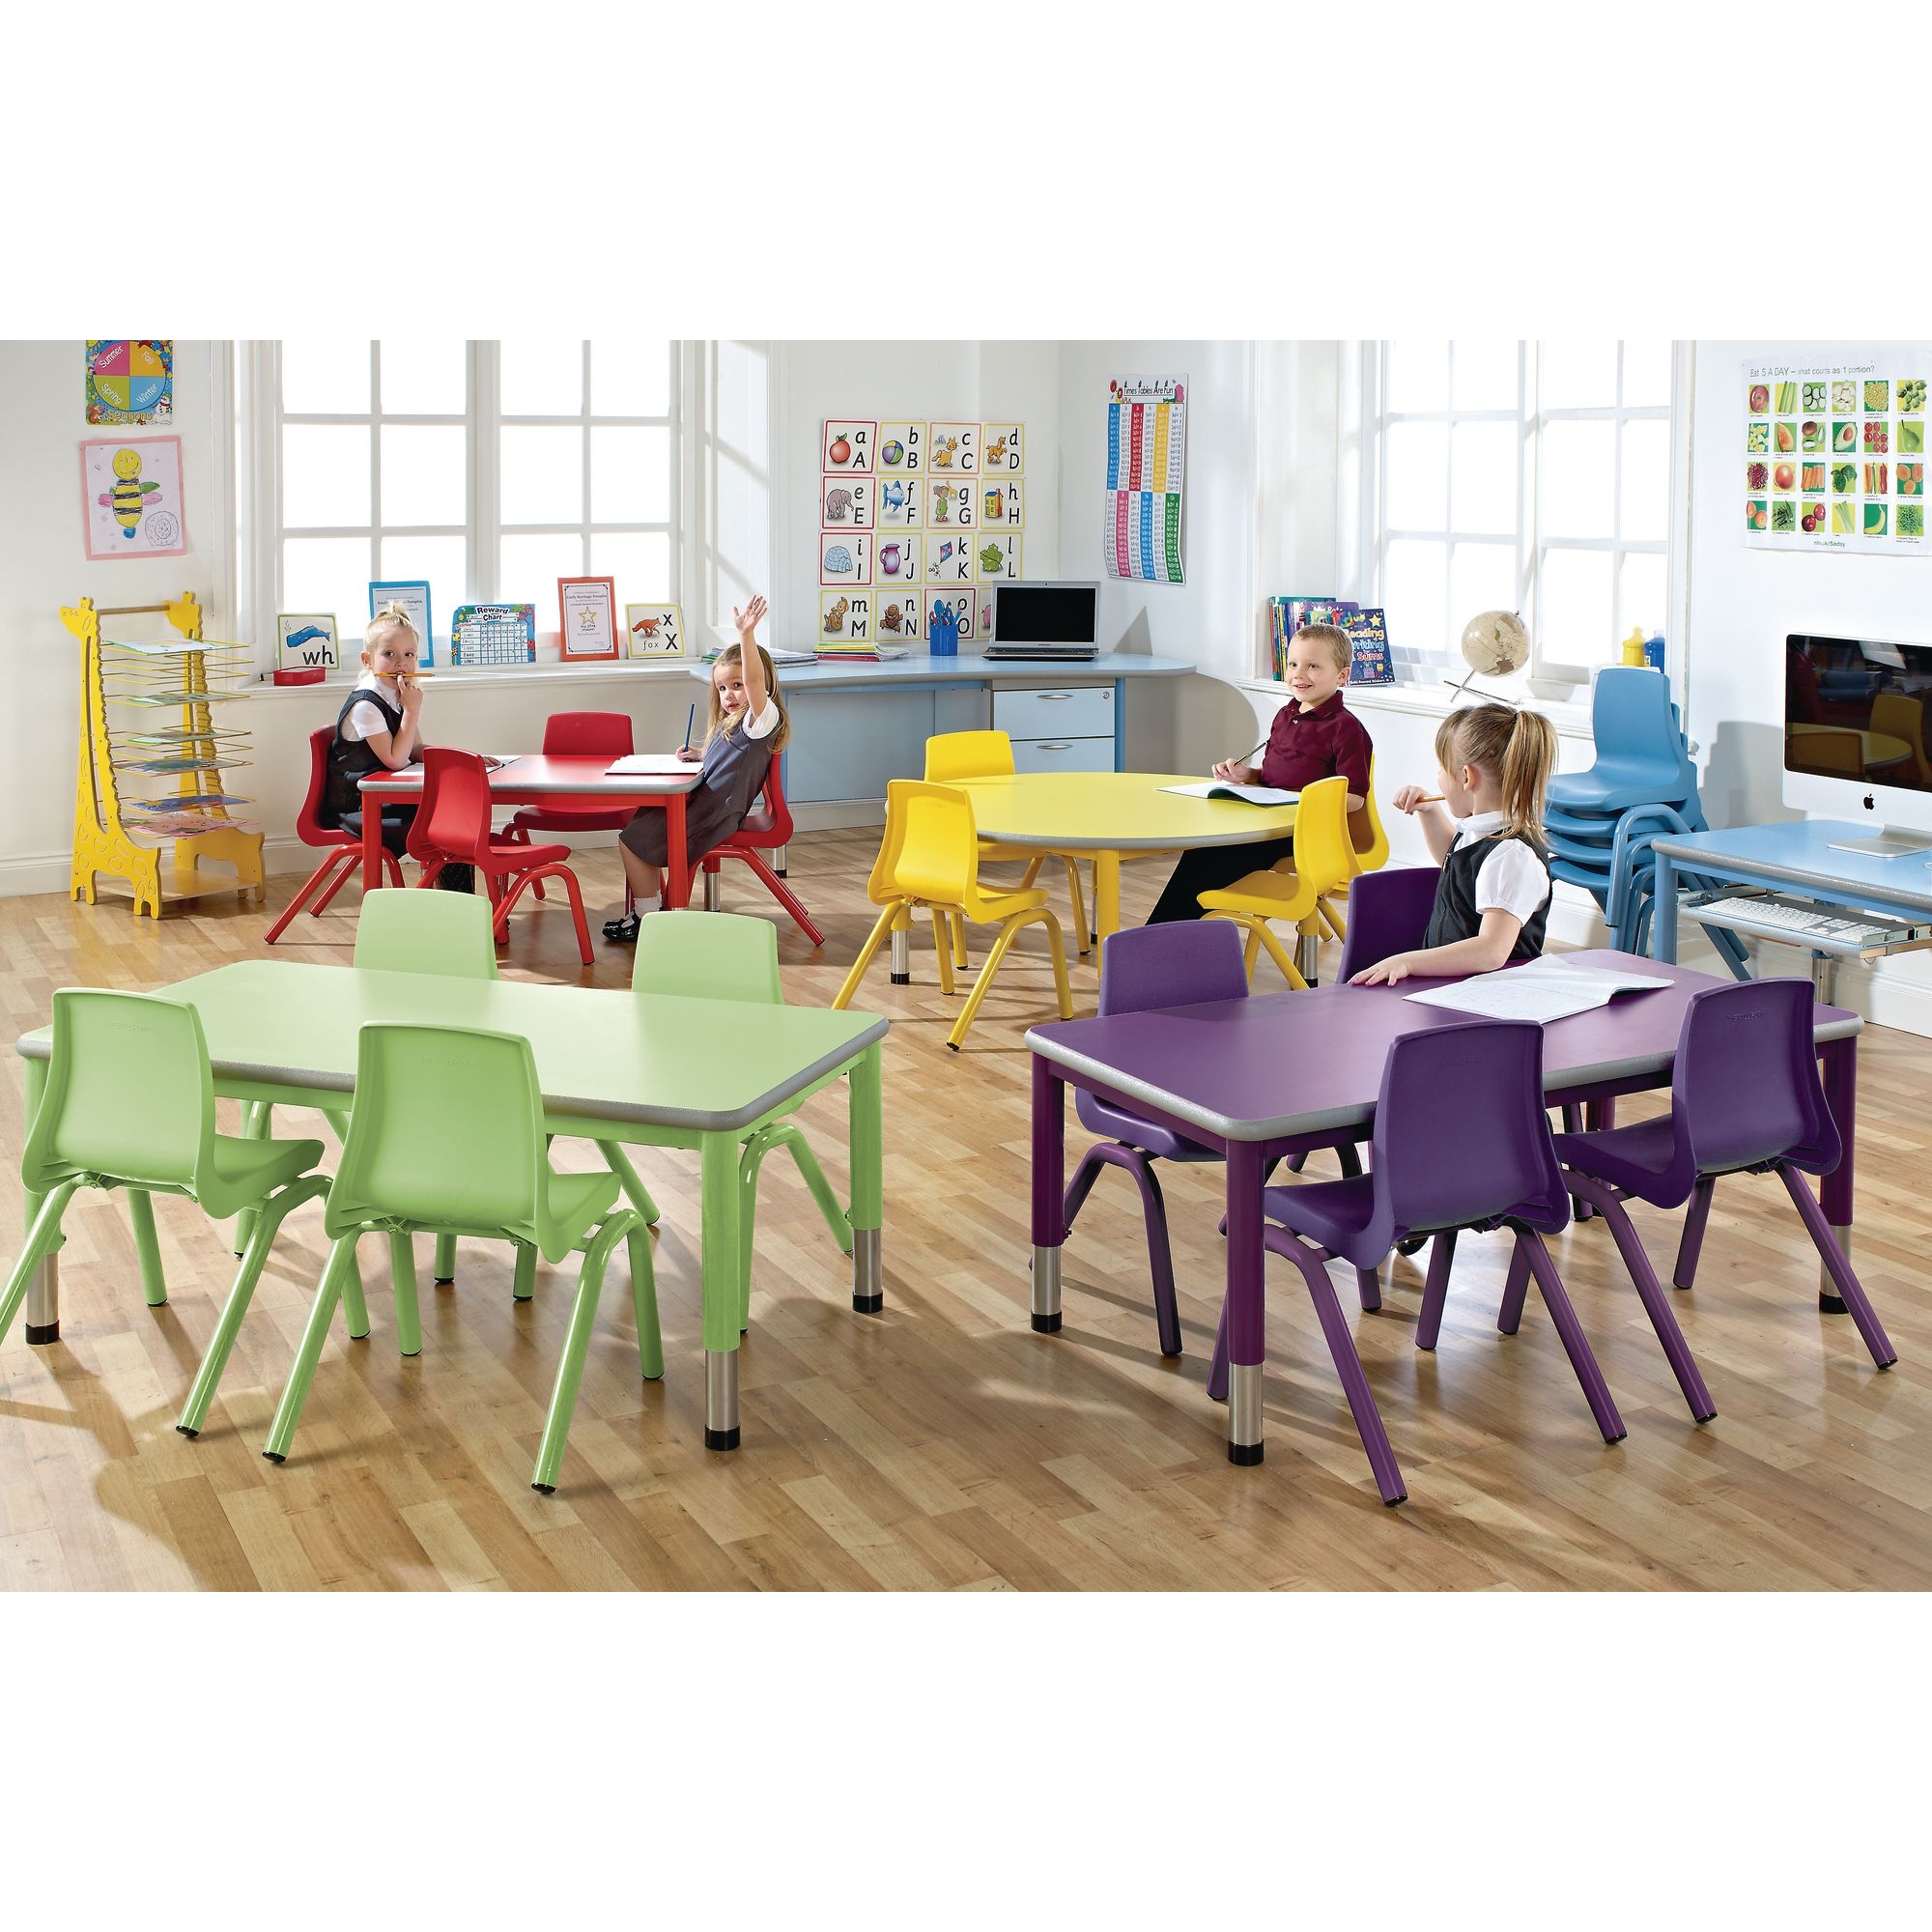 Harlequin Rectangular Height Adjustable Steel Classroom Pack: Table and 4 Chairs - 900 x 600 x 640mm - Red